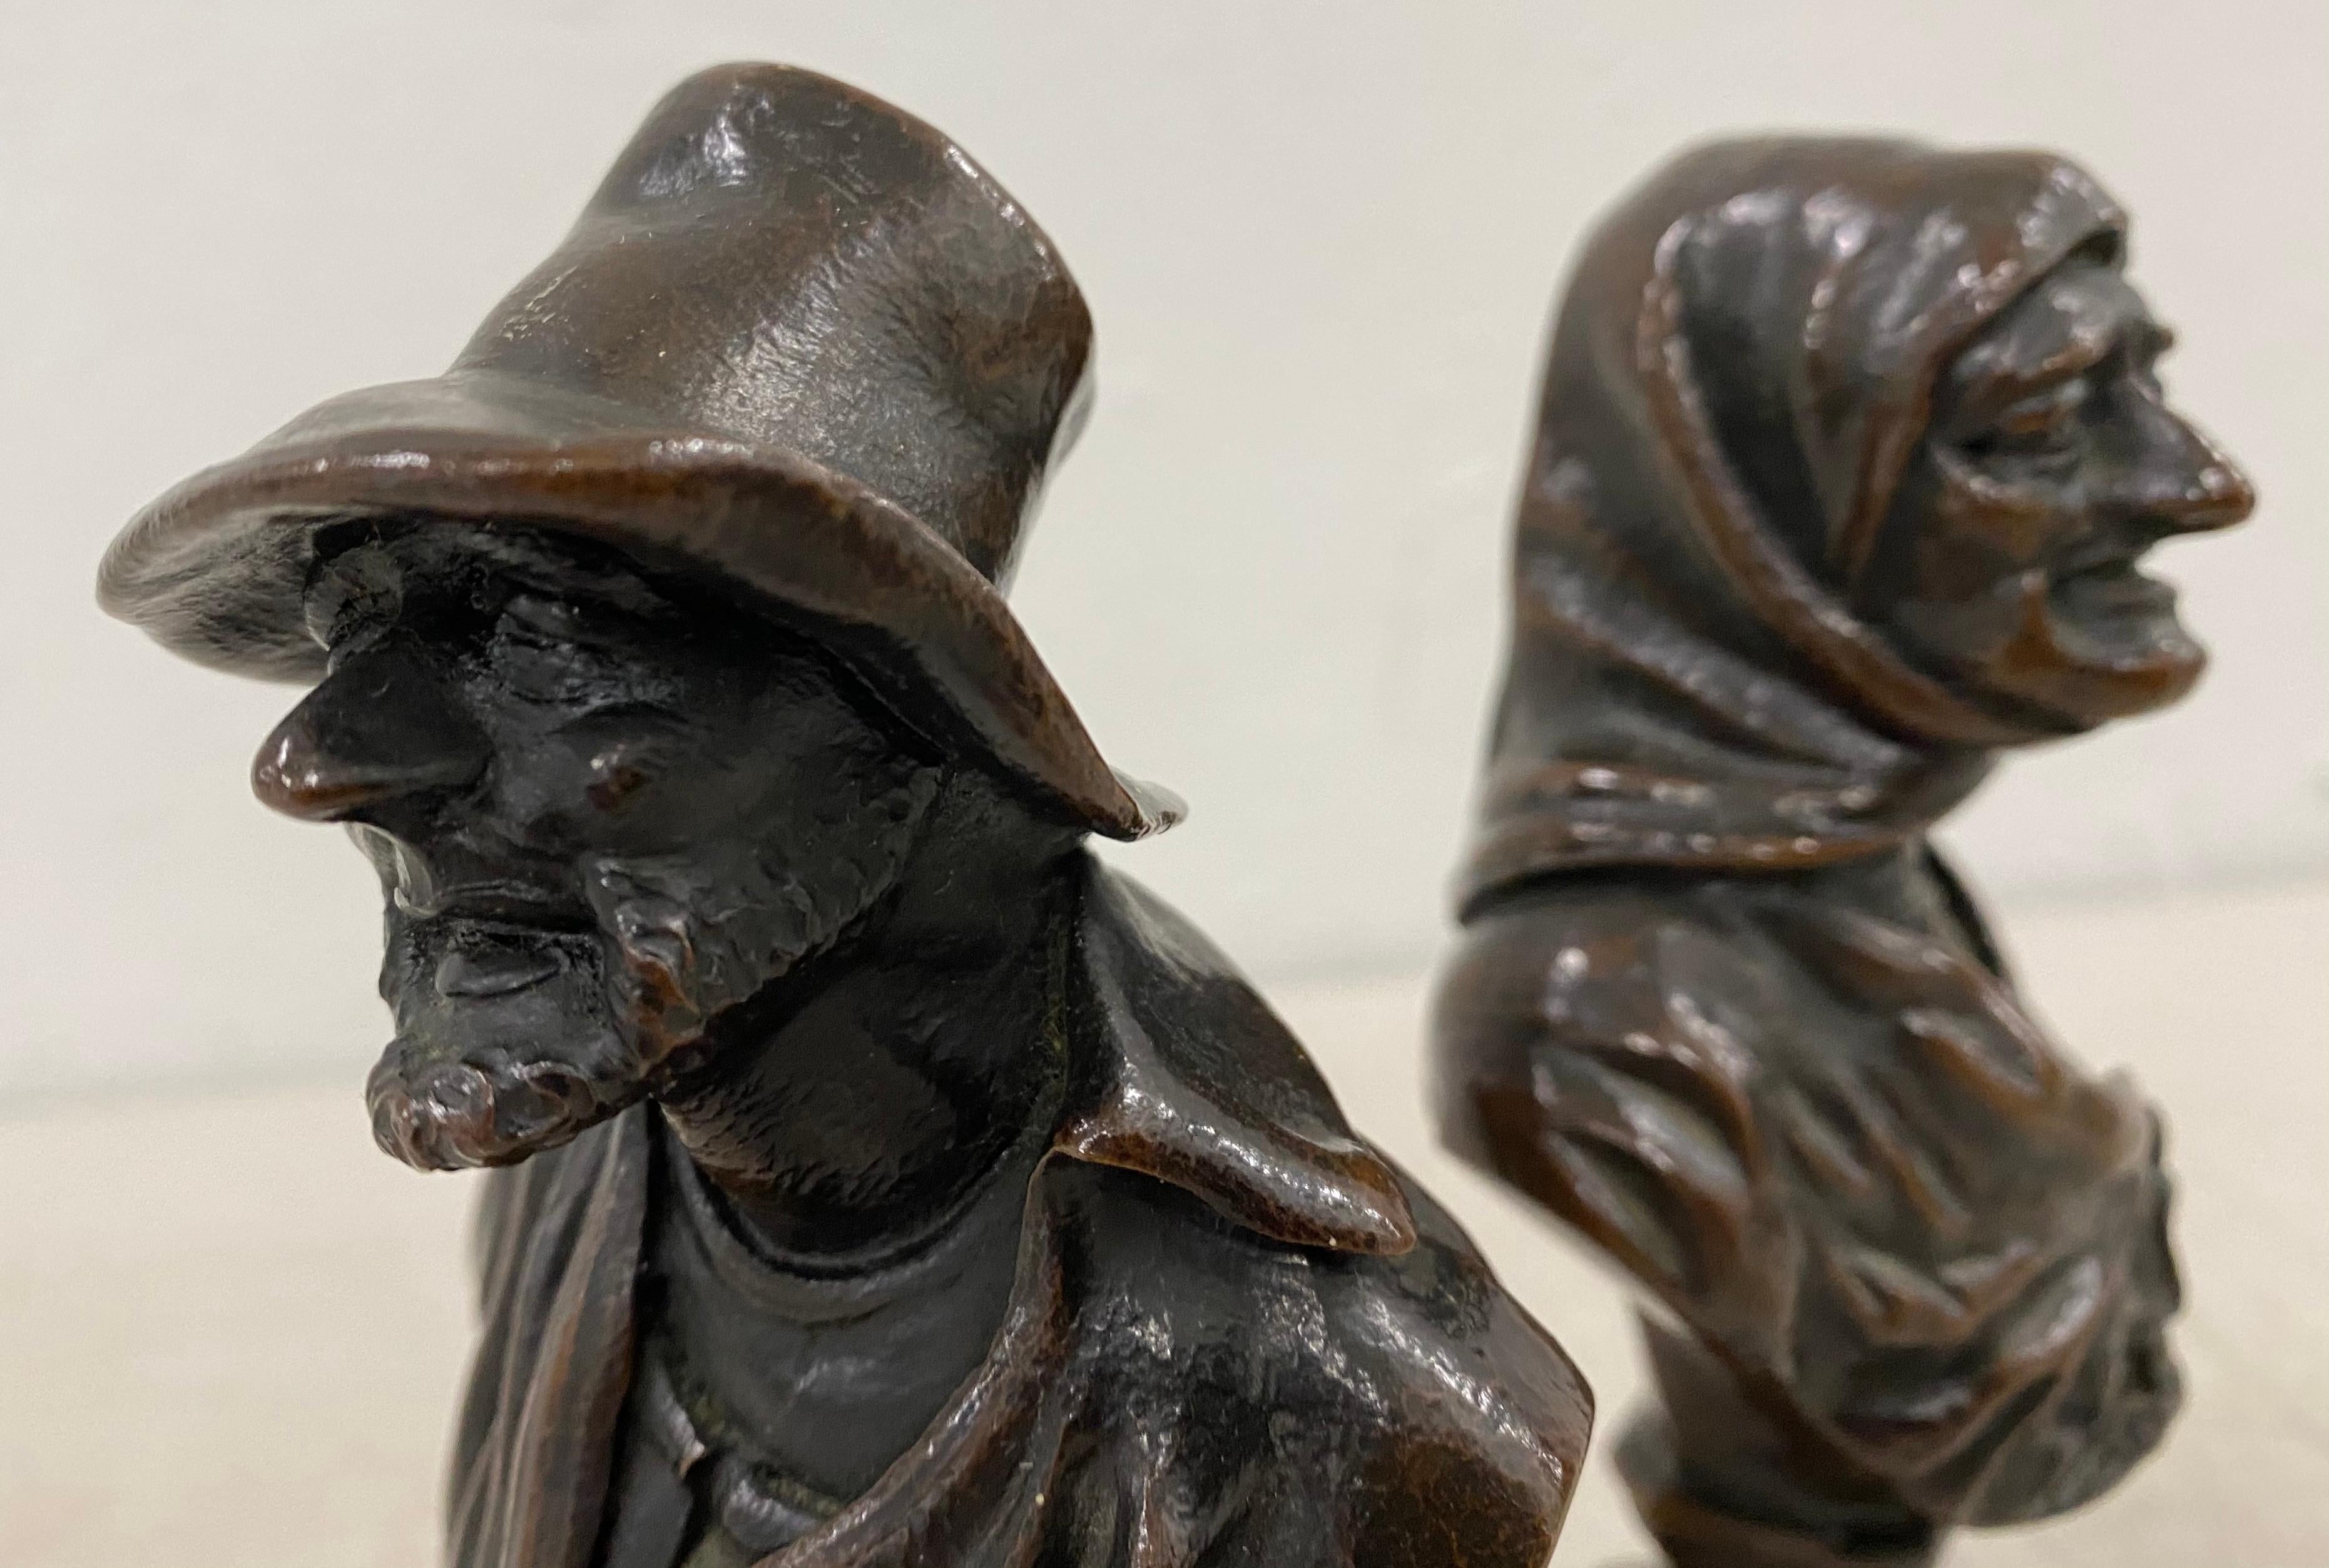 19th Century Old Man & Woman Bronze Sculptures

These charming bronze sculptures have a rich patina that only comes with age

Each bronze measures 2